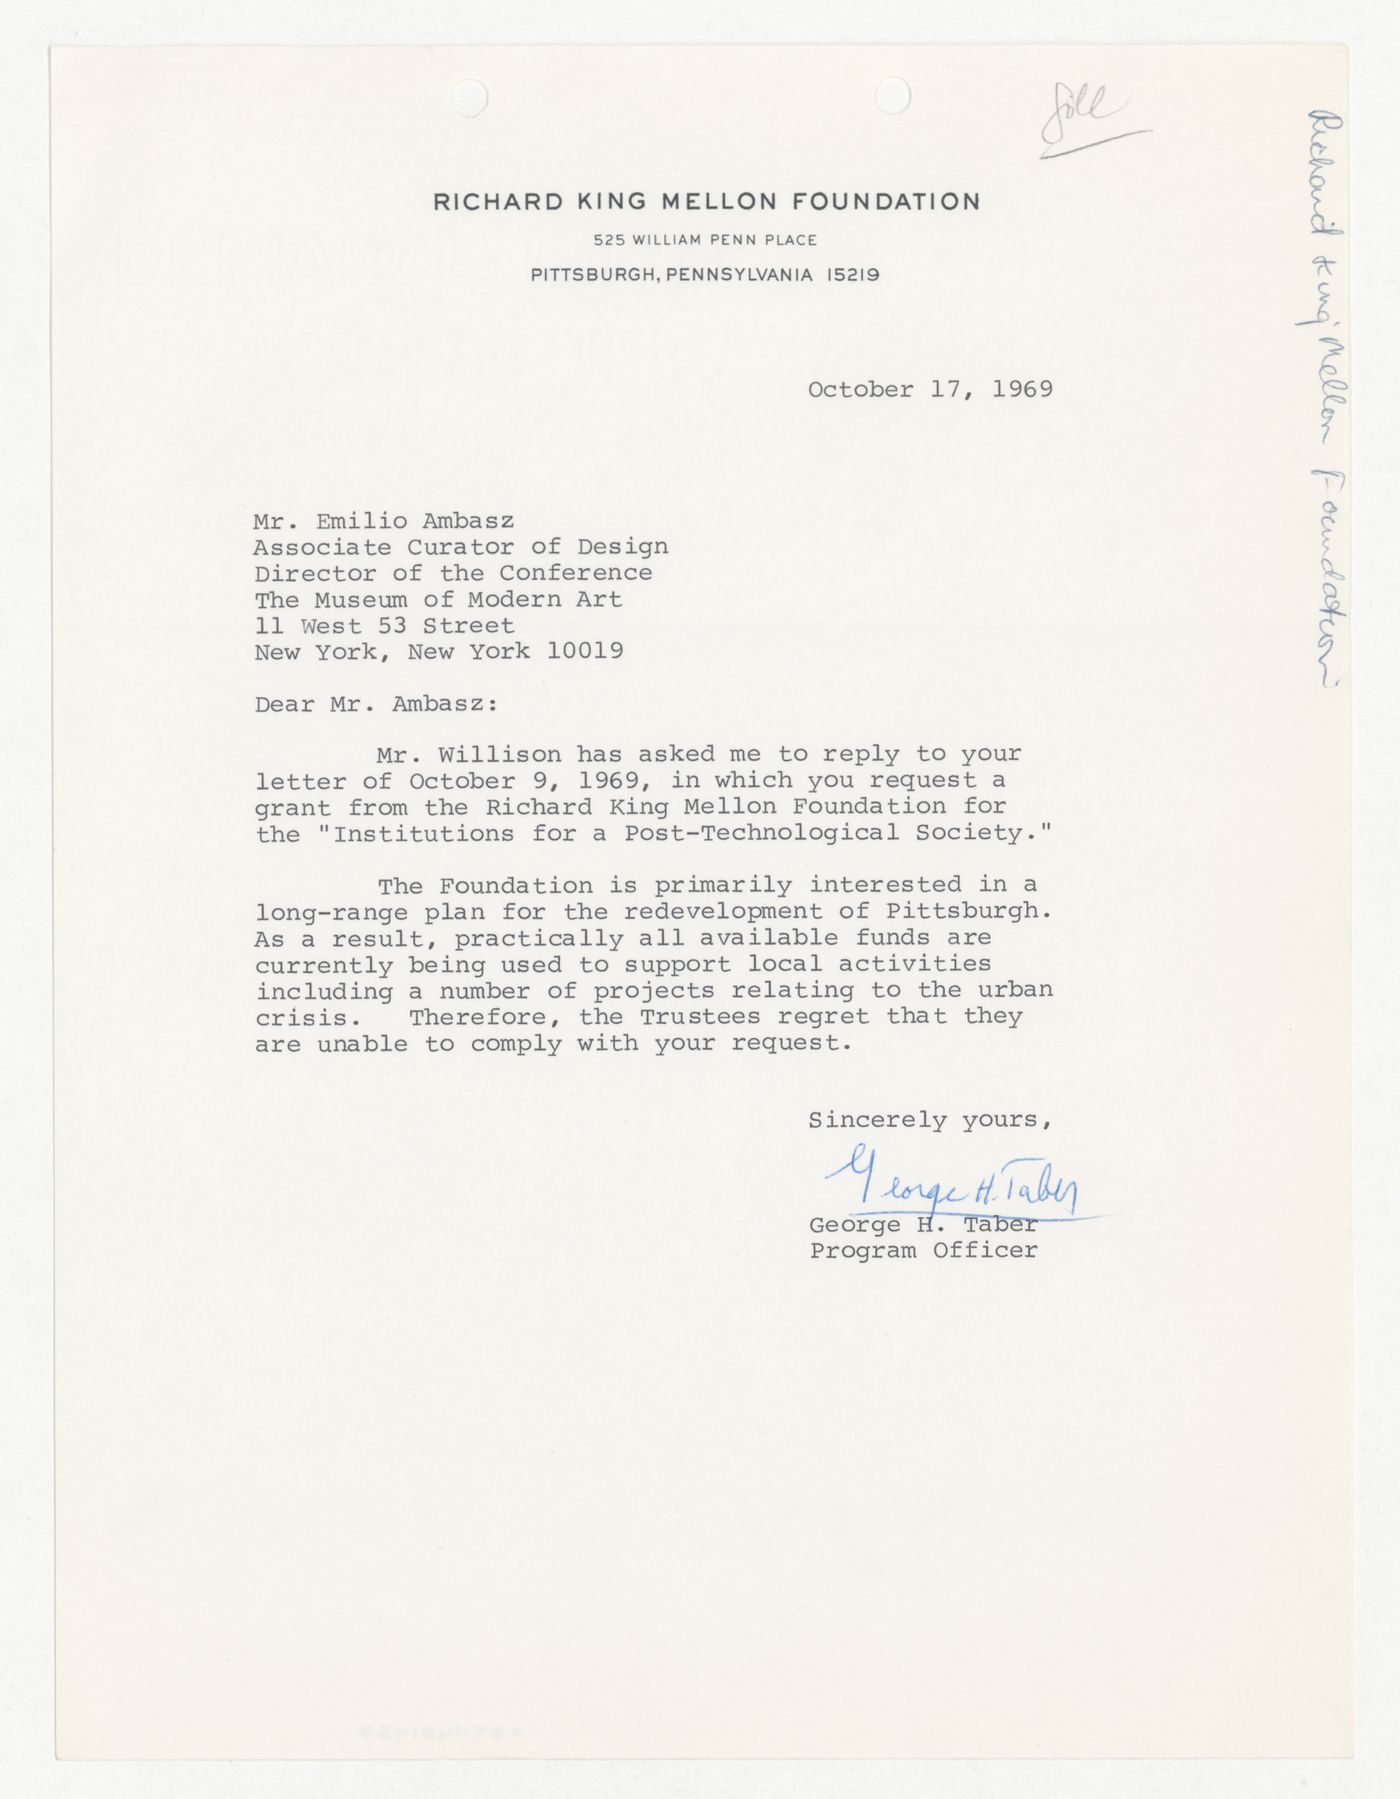 Letter from George H. Taber to Emilio Ambasz responding to proposal for Institutions for a Post-Technological Society conference